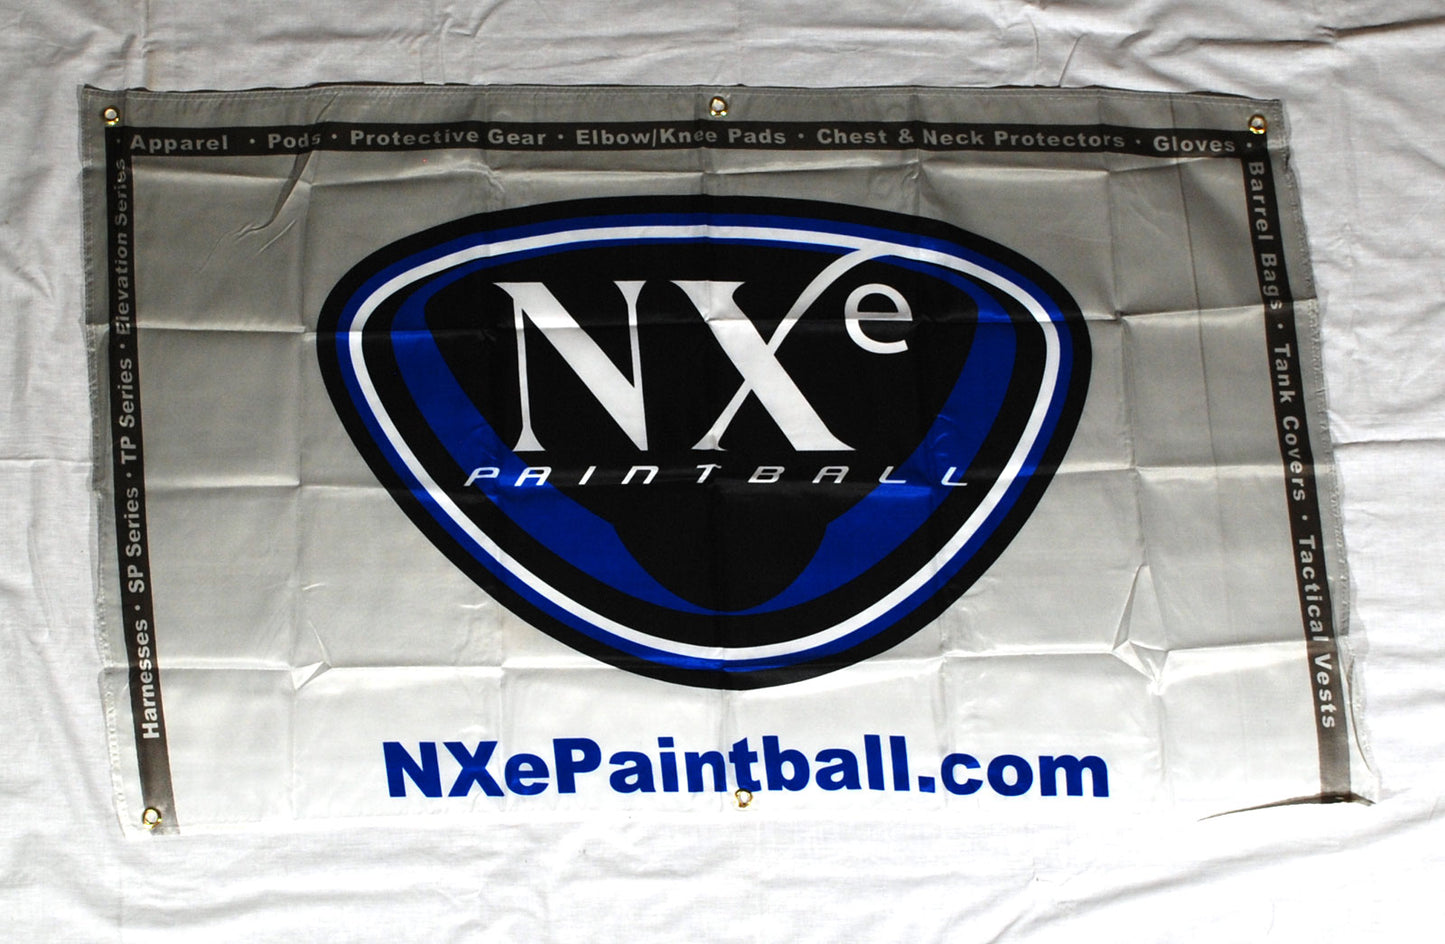 NXe Paintball Cloth Banner - NXE